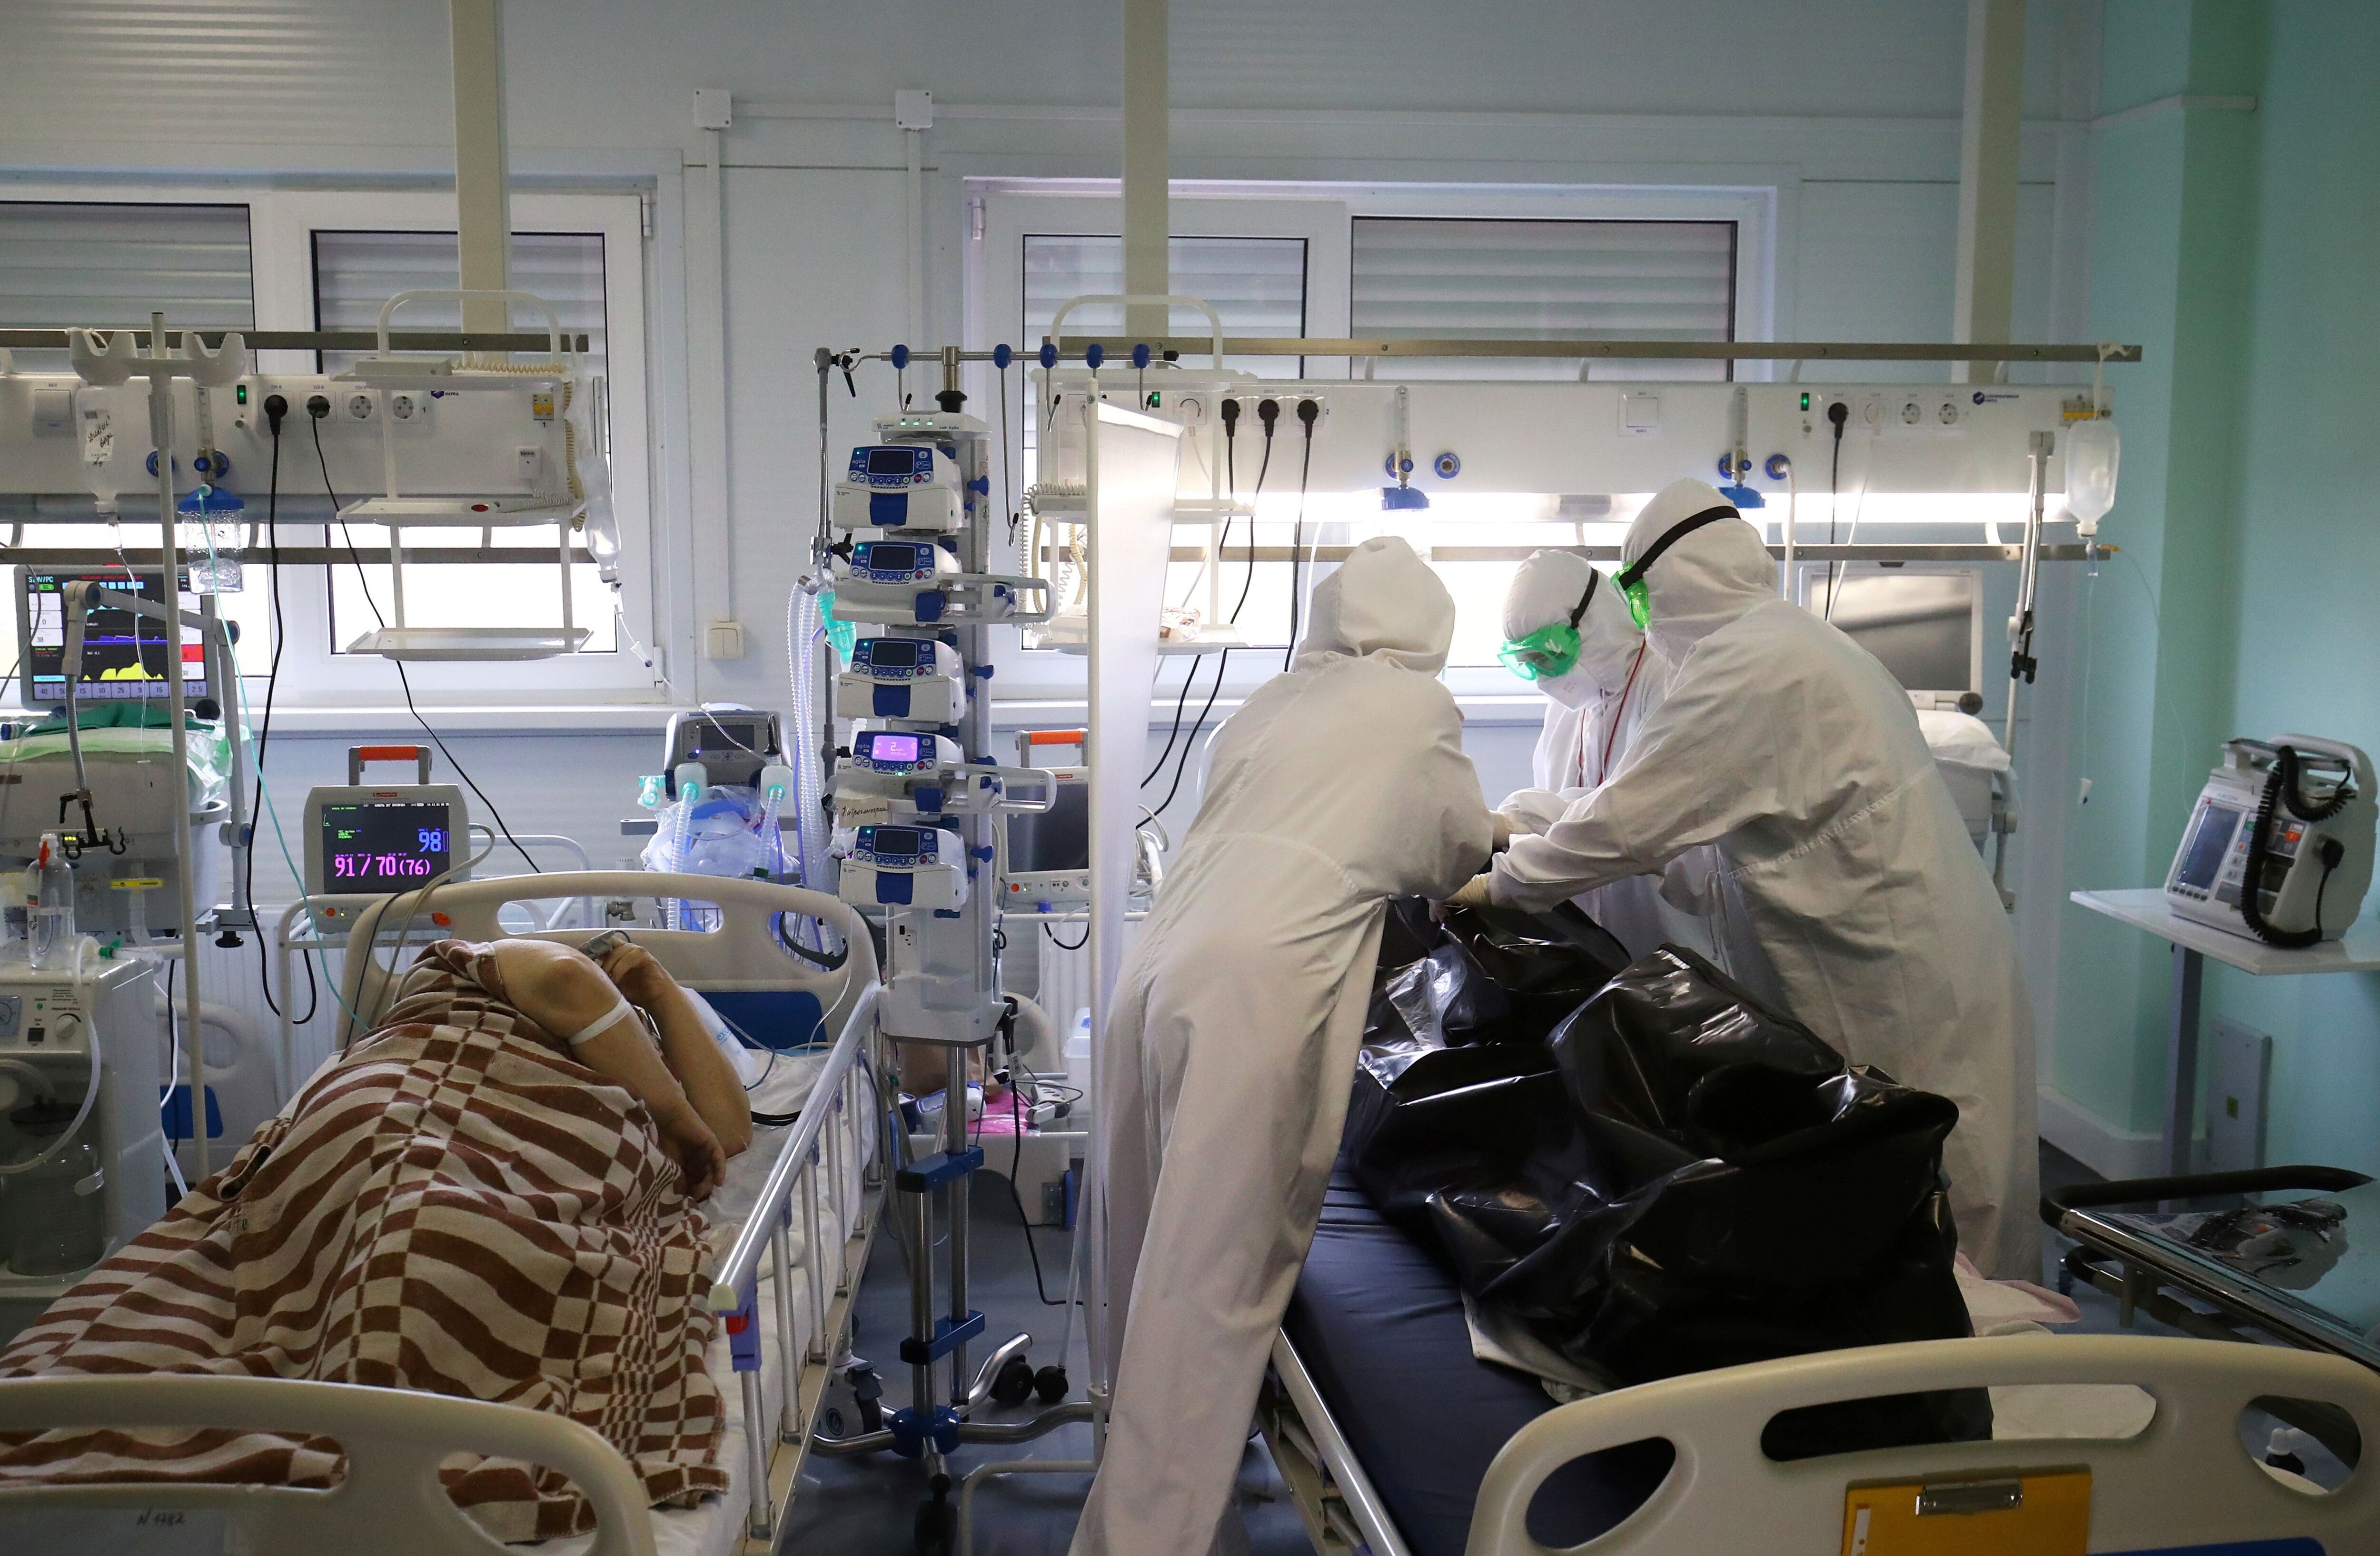 Medical specialists bag the body of a person who died in the ICU unit for patients with coronavirus disease (COVID-19) at a local hospital in the city of Kalach-on-Don in the Volgograd region, Russia November 14, 2021. REUTERS / Kirill Braga